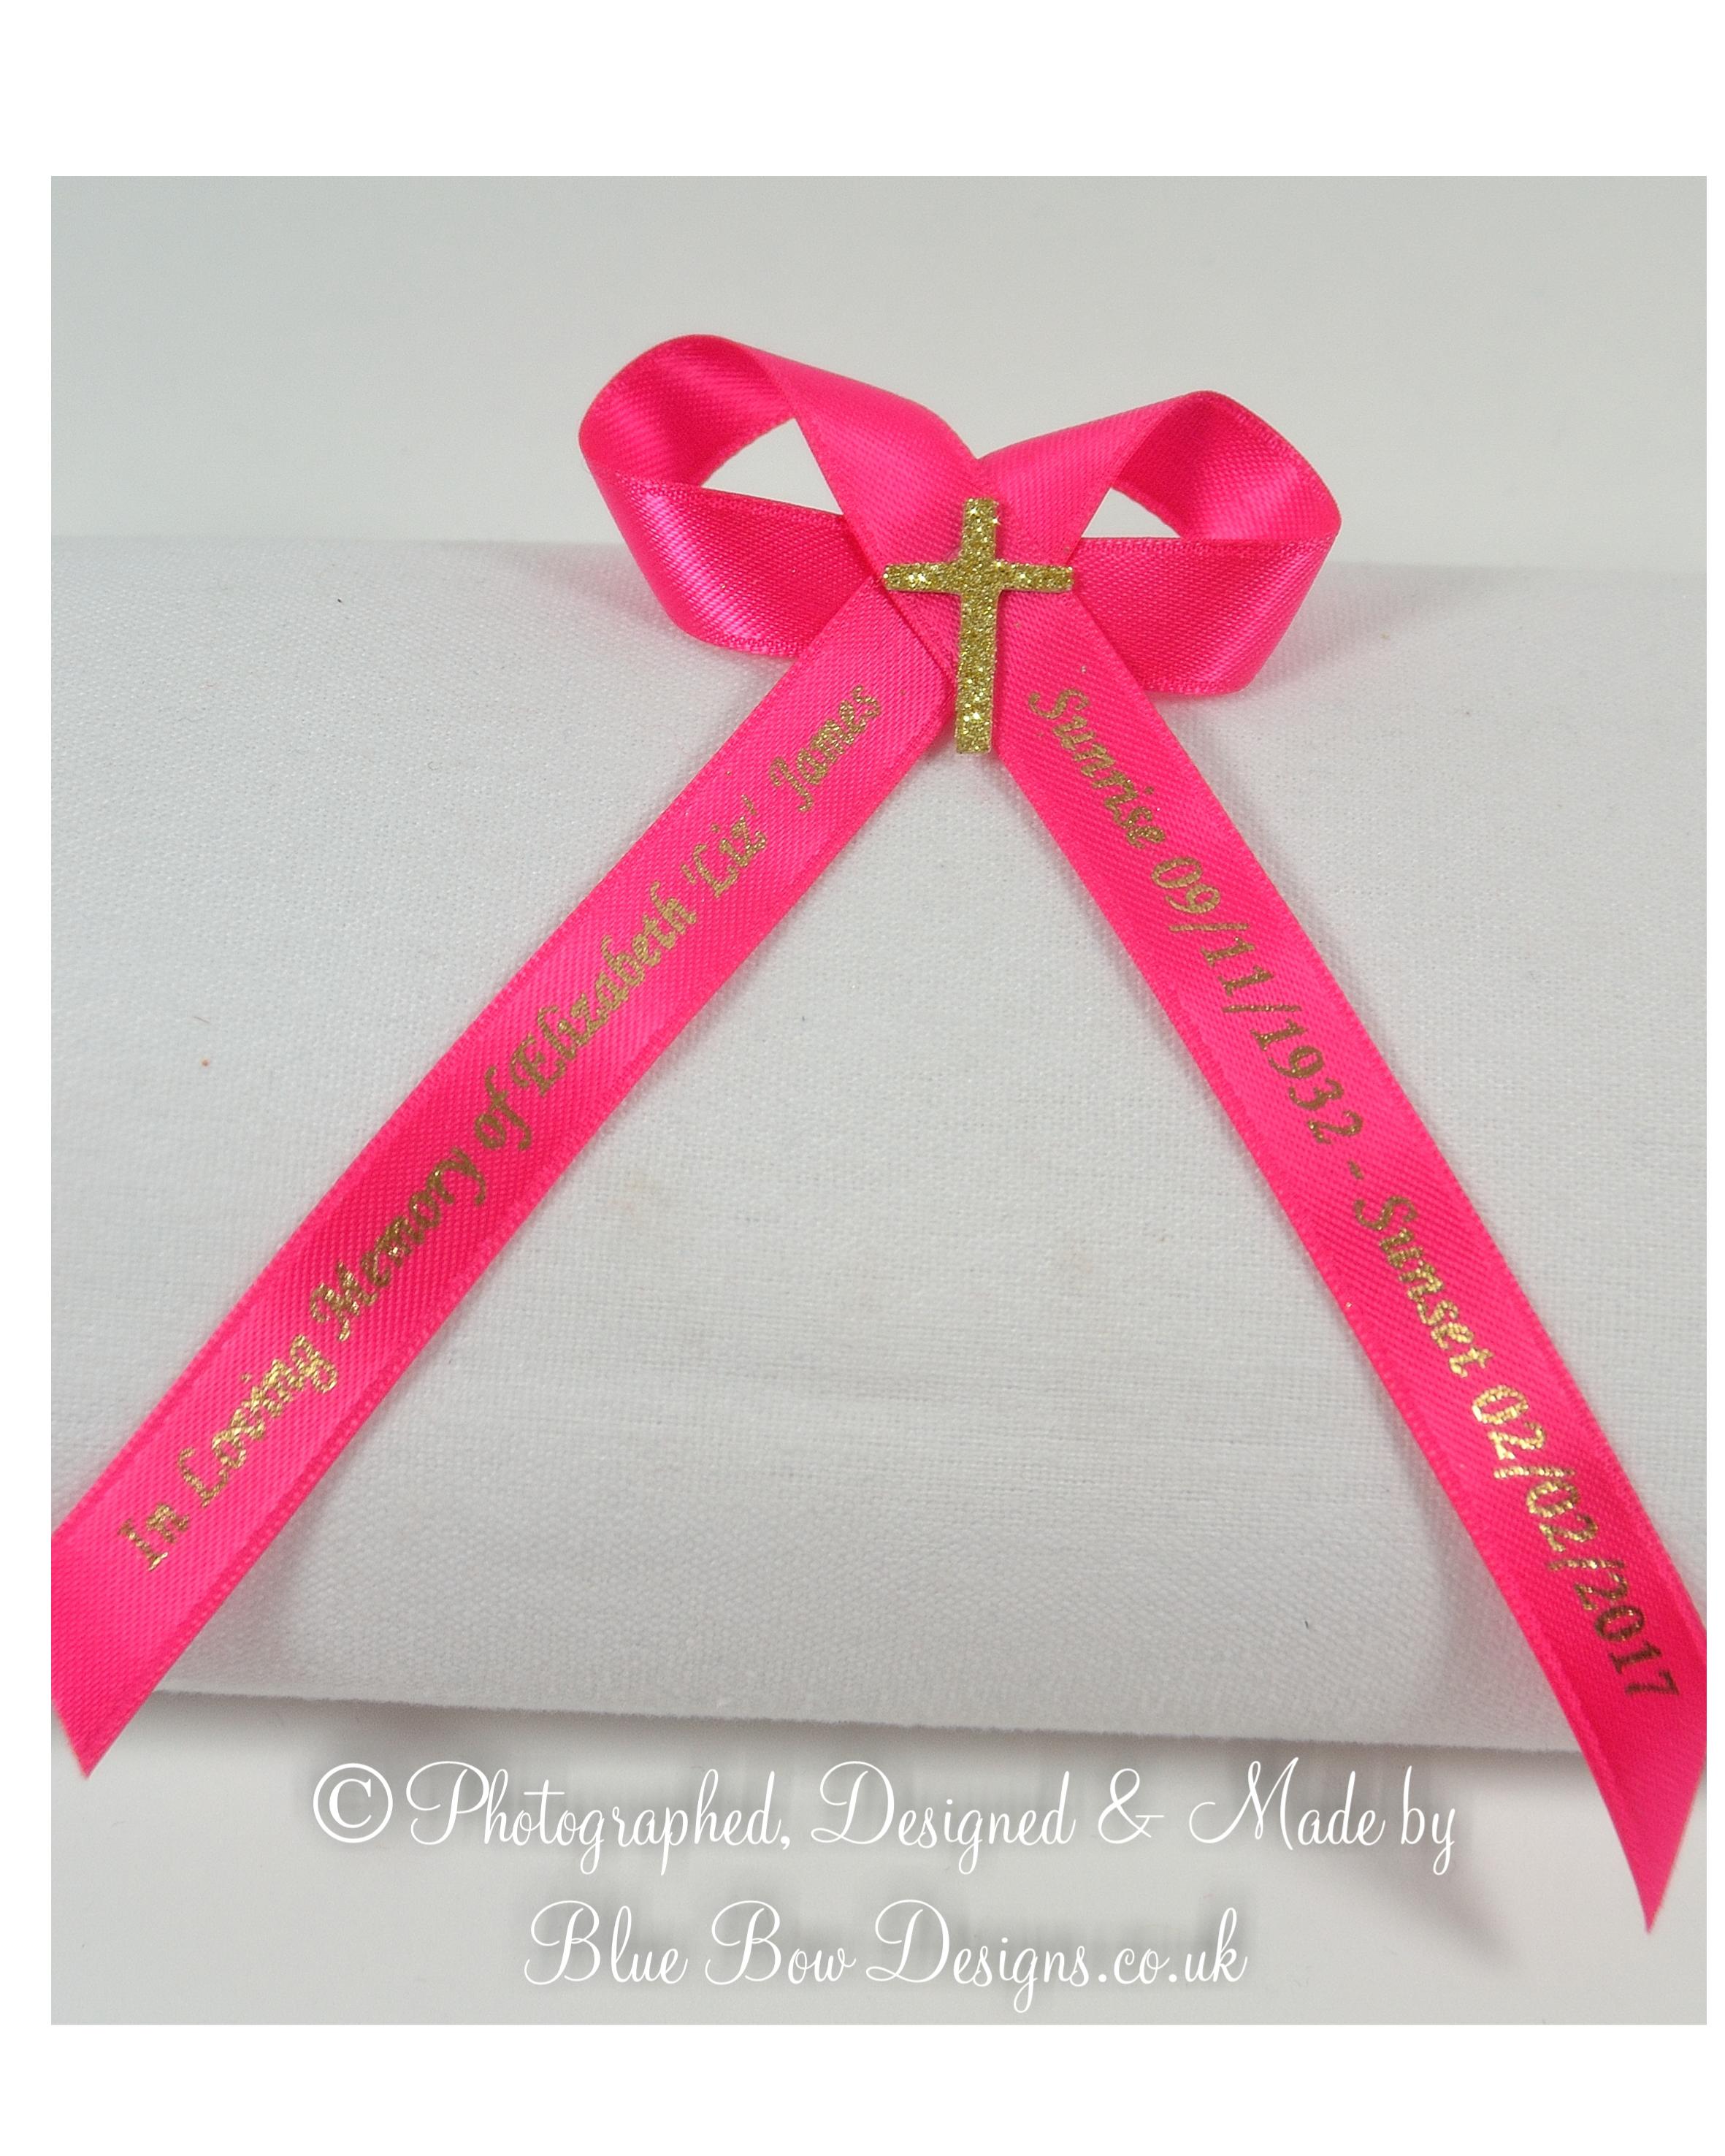 Fuchsia pink memorial ribbon with gold cross